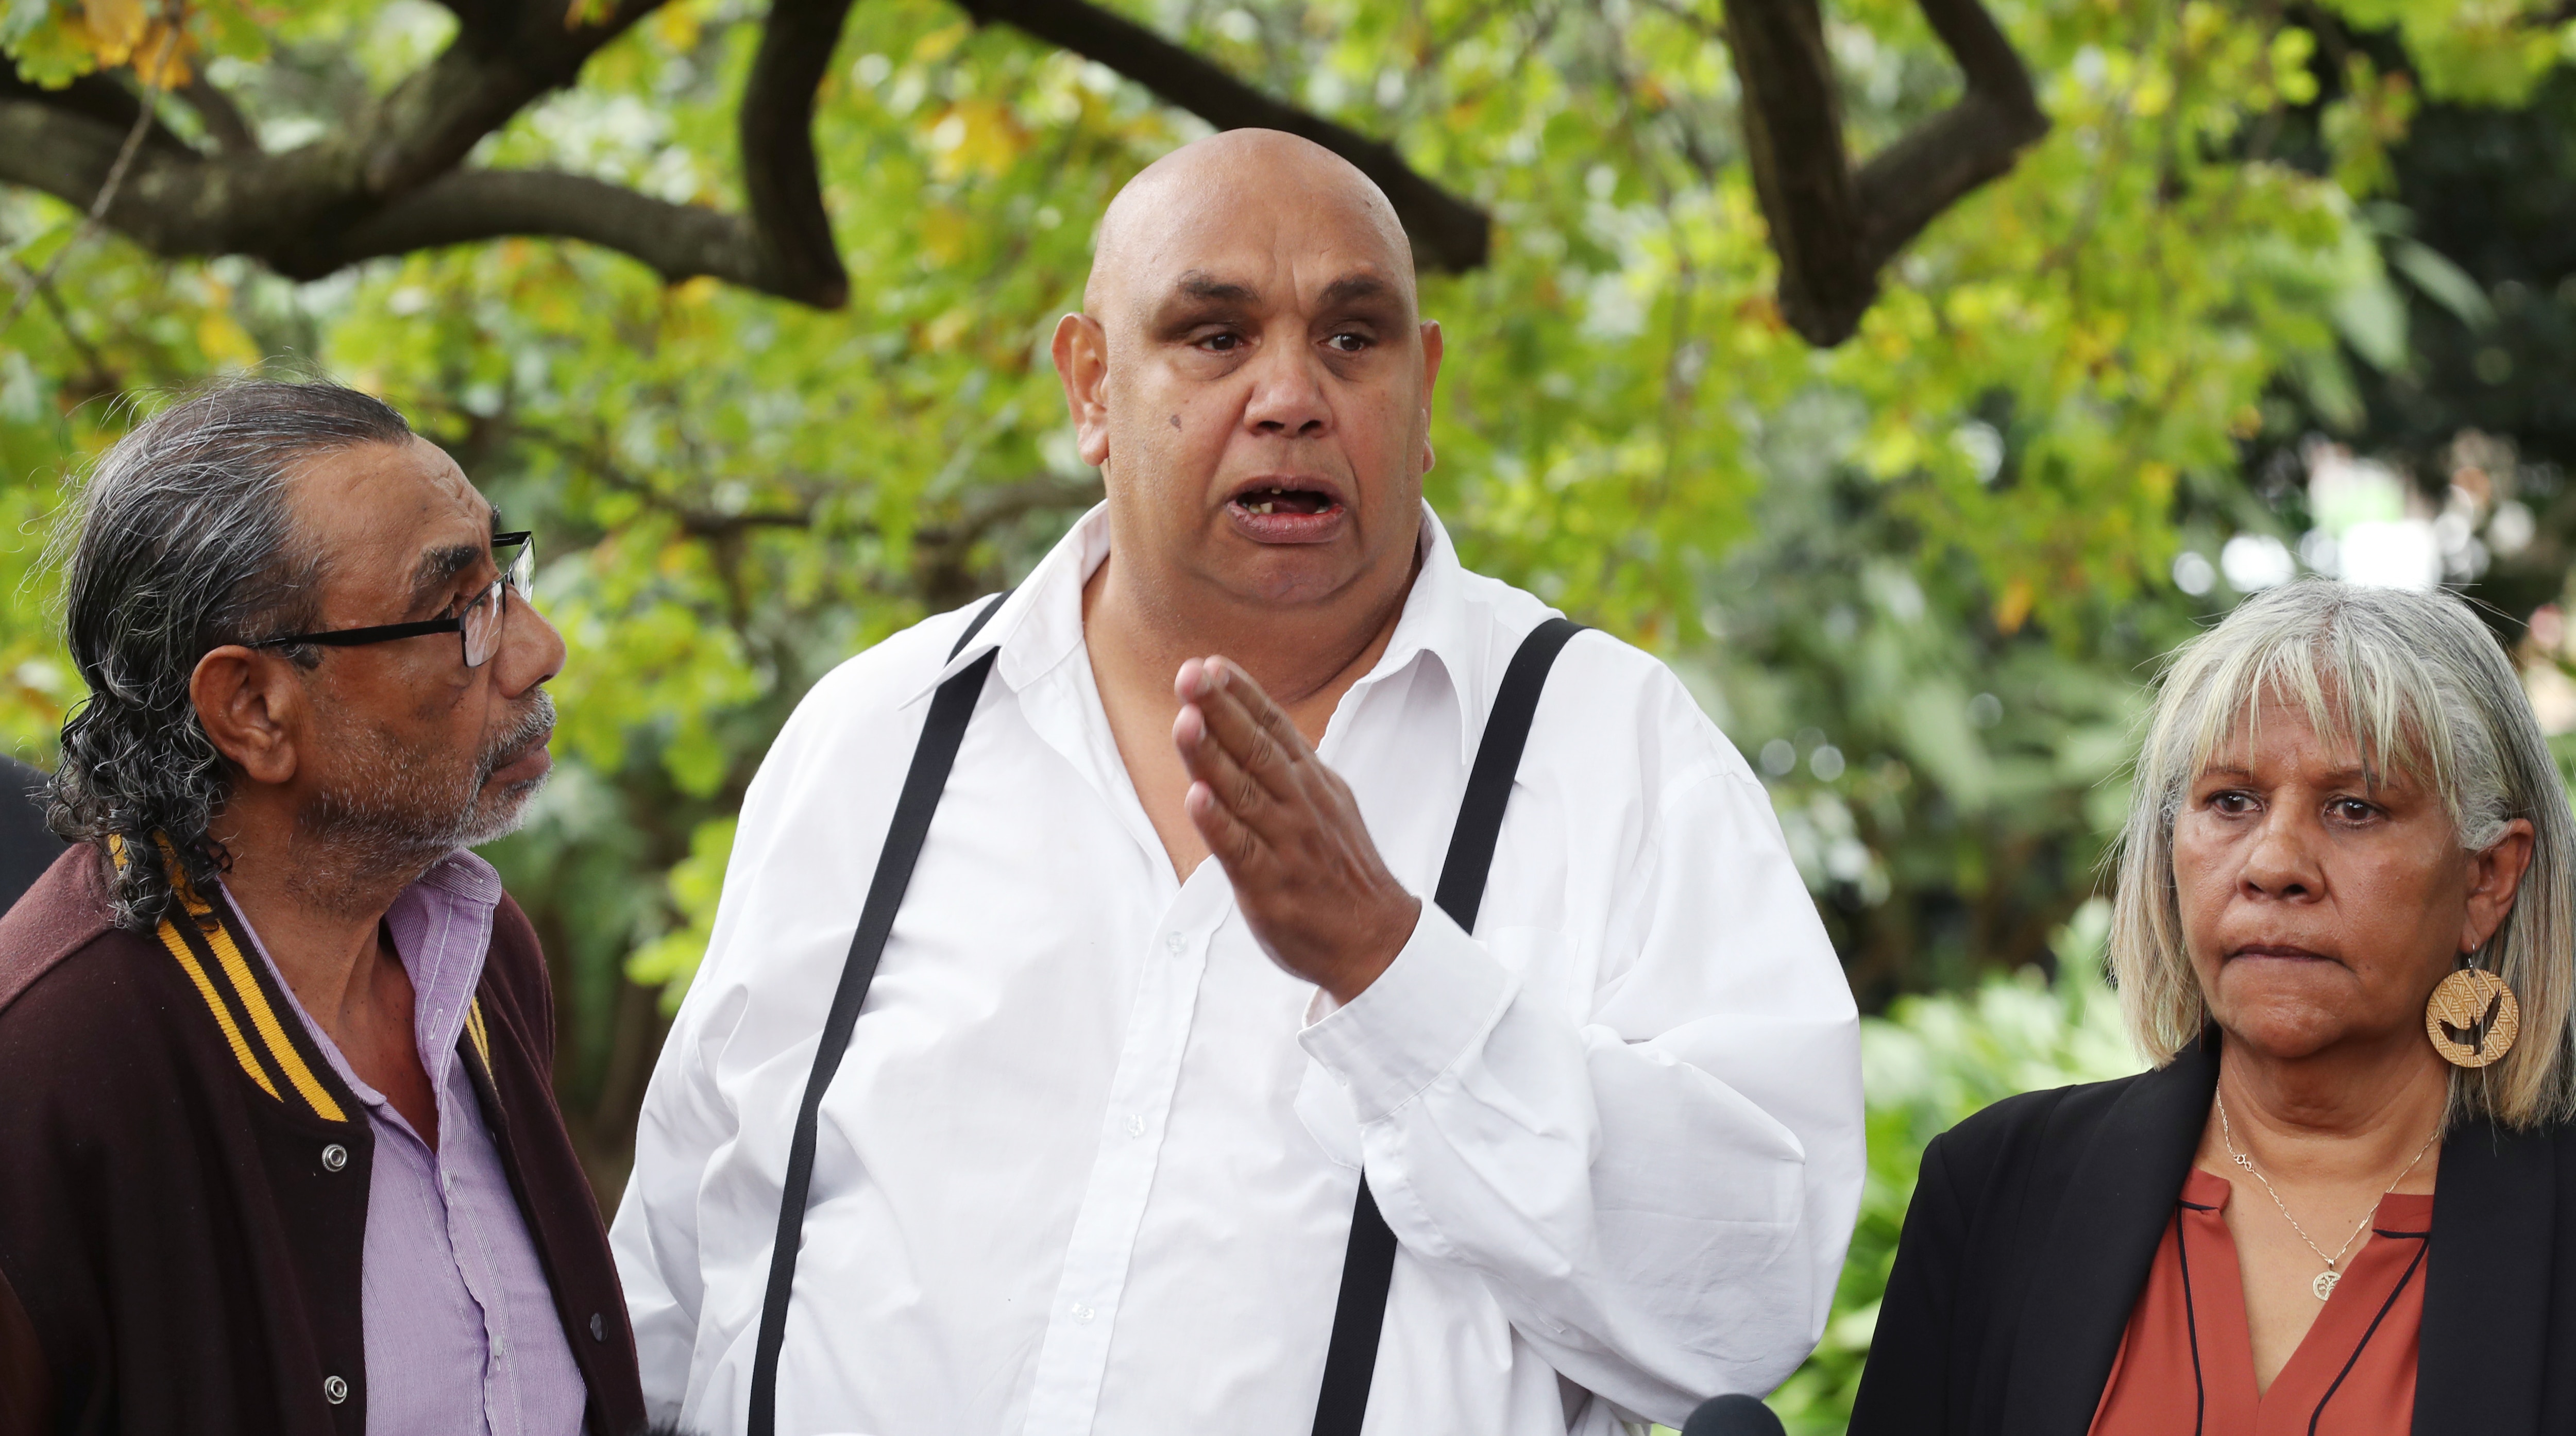 Mick Edwards, Kutcha Edwards and Eva Edwards speak to the media during a press conference in Melbourne, Thursday, March 18, 2020. The Premier and Minister Aboriginal Affairs Gavin Jennings announced that $10 million will be invested to develop a scheme wh